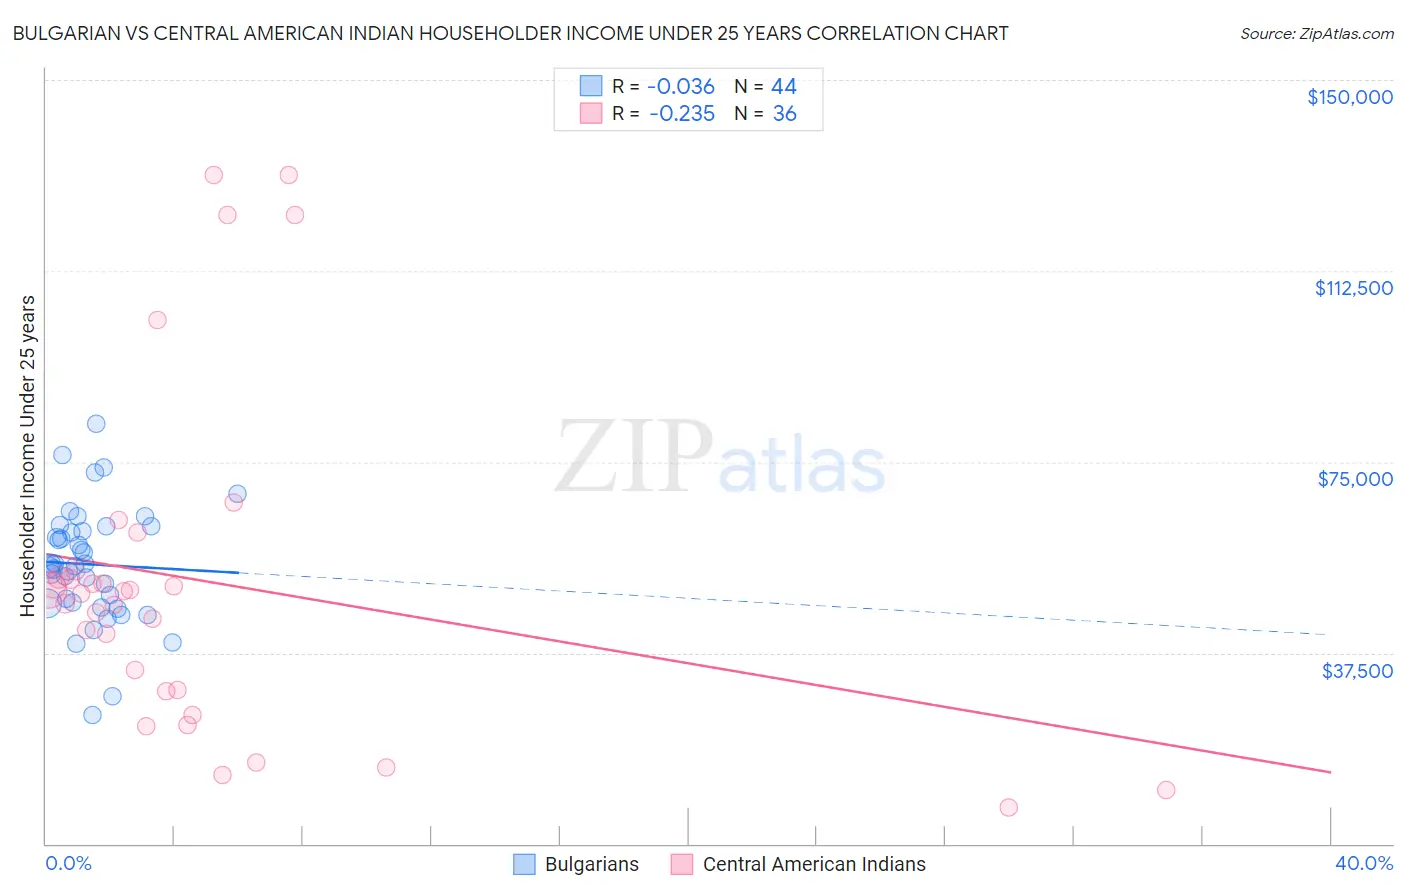 Bulgarian vs Central American Indian Householder Income Under 25 years